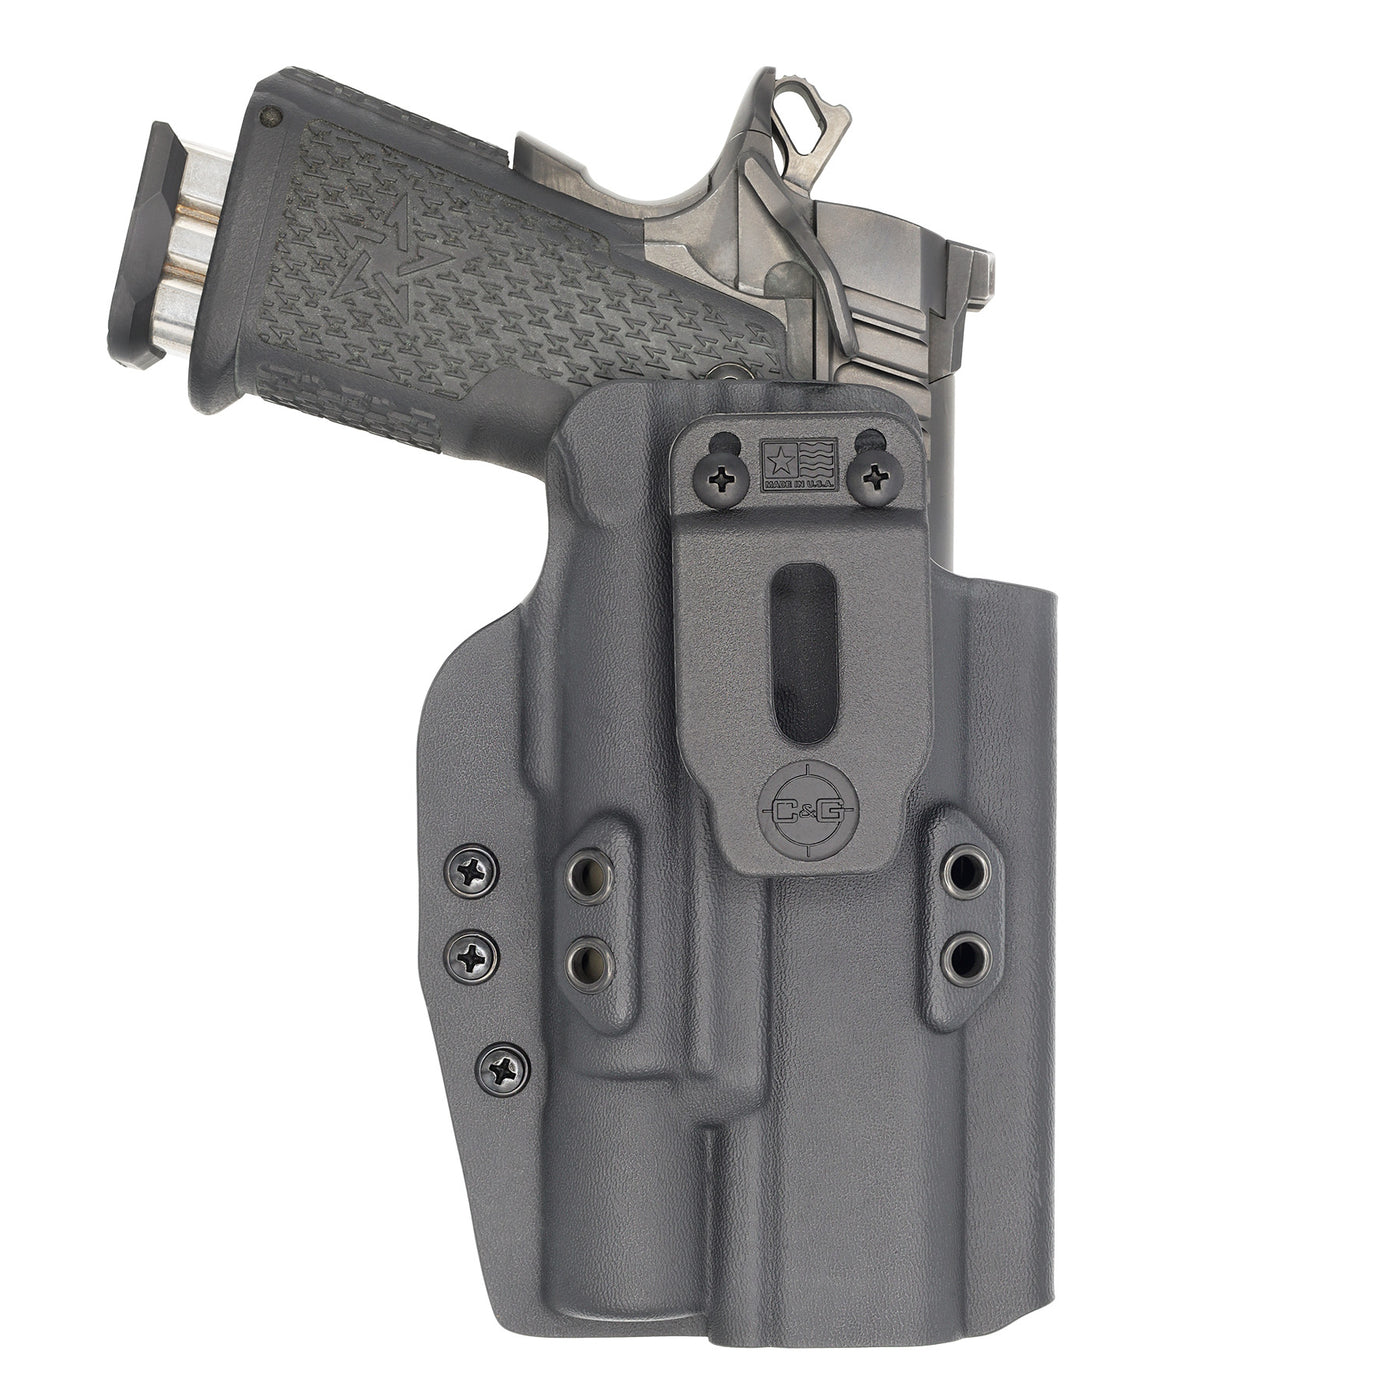 C&G Holsters custom IWB Tactical 2011 Surefire X300 in holstered position